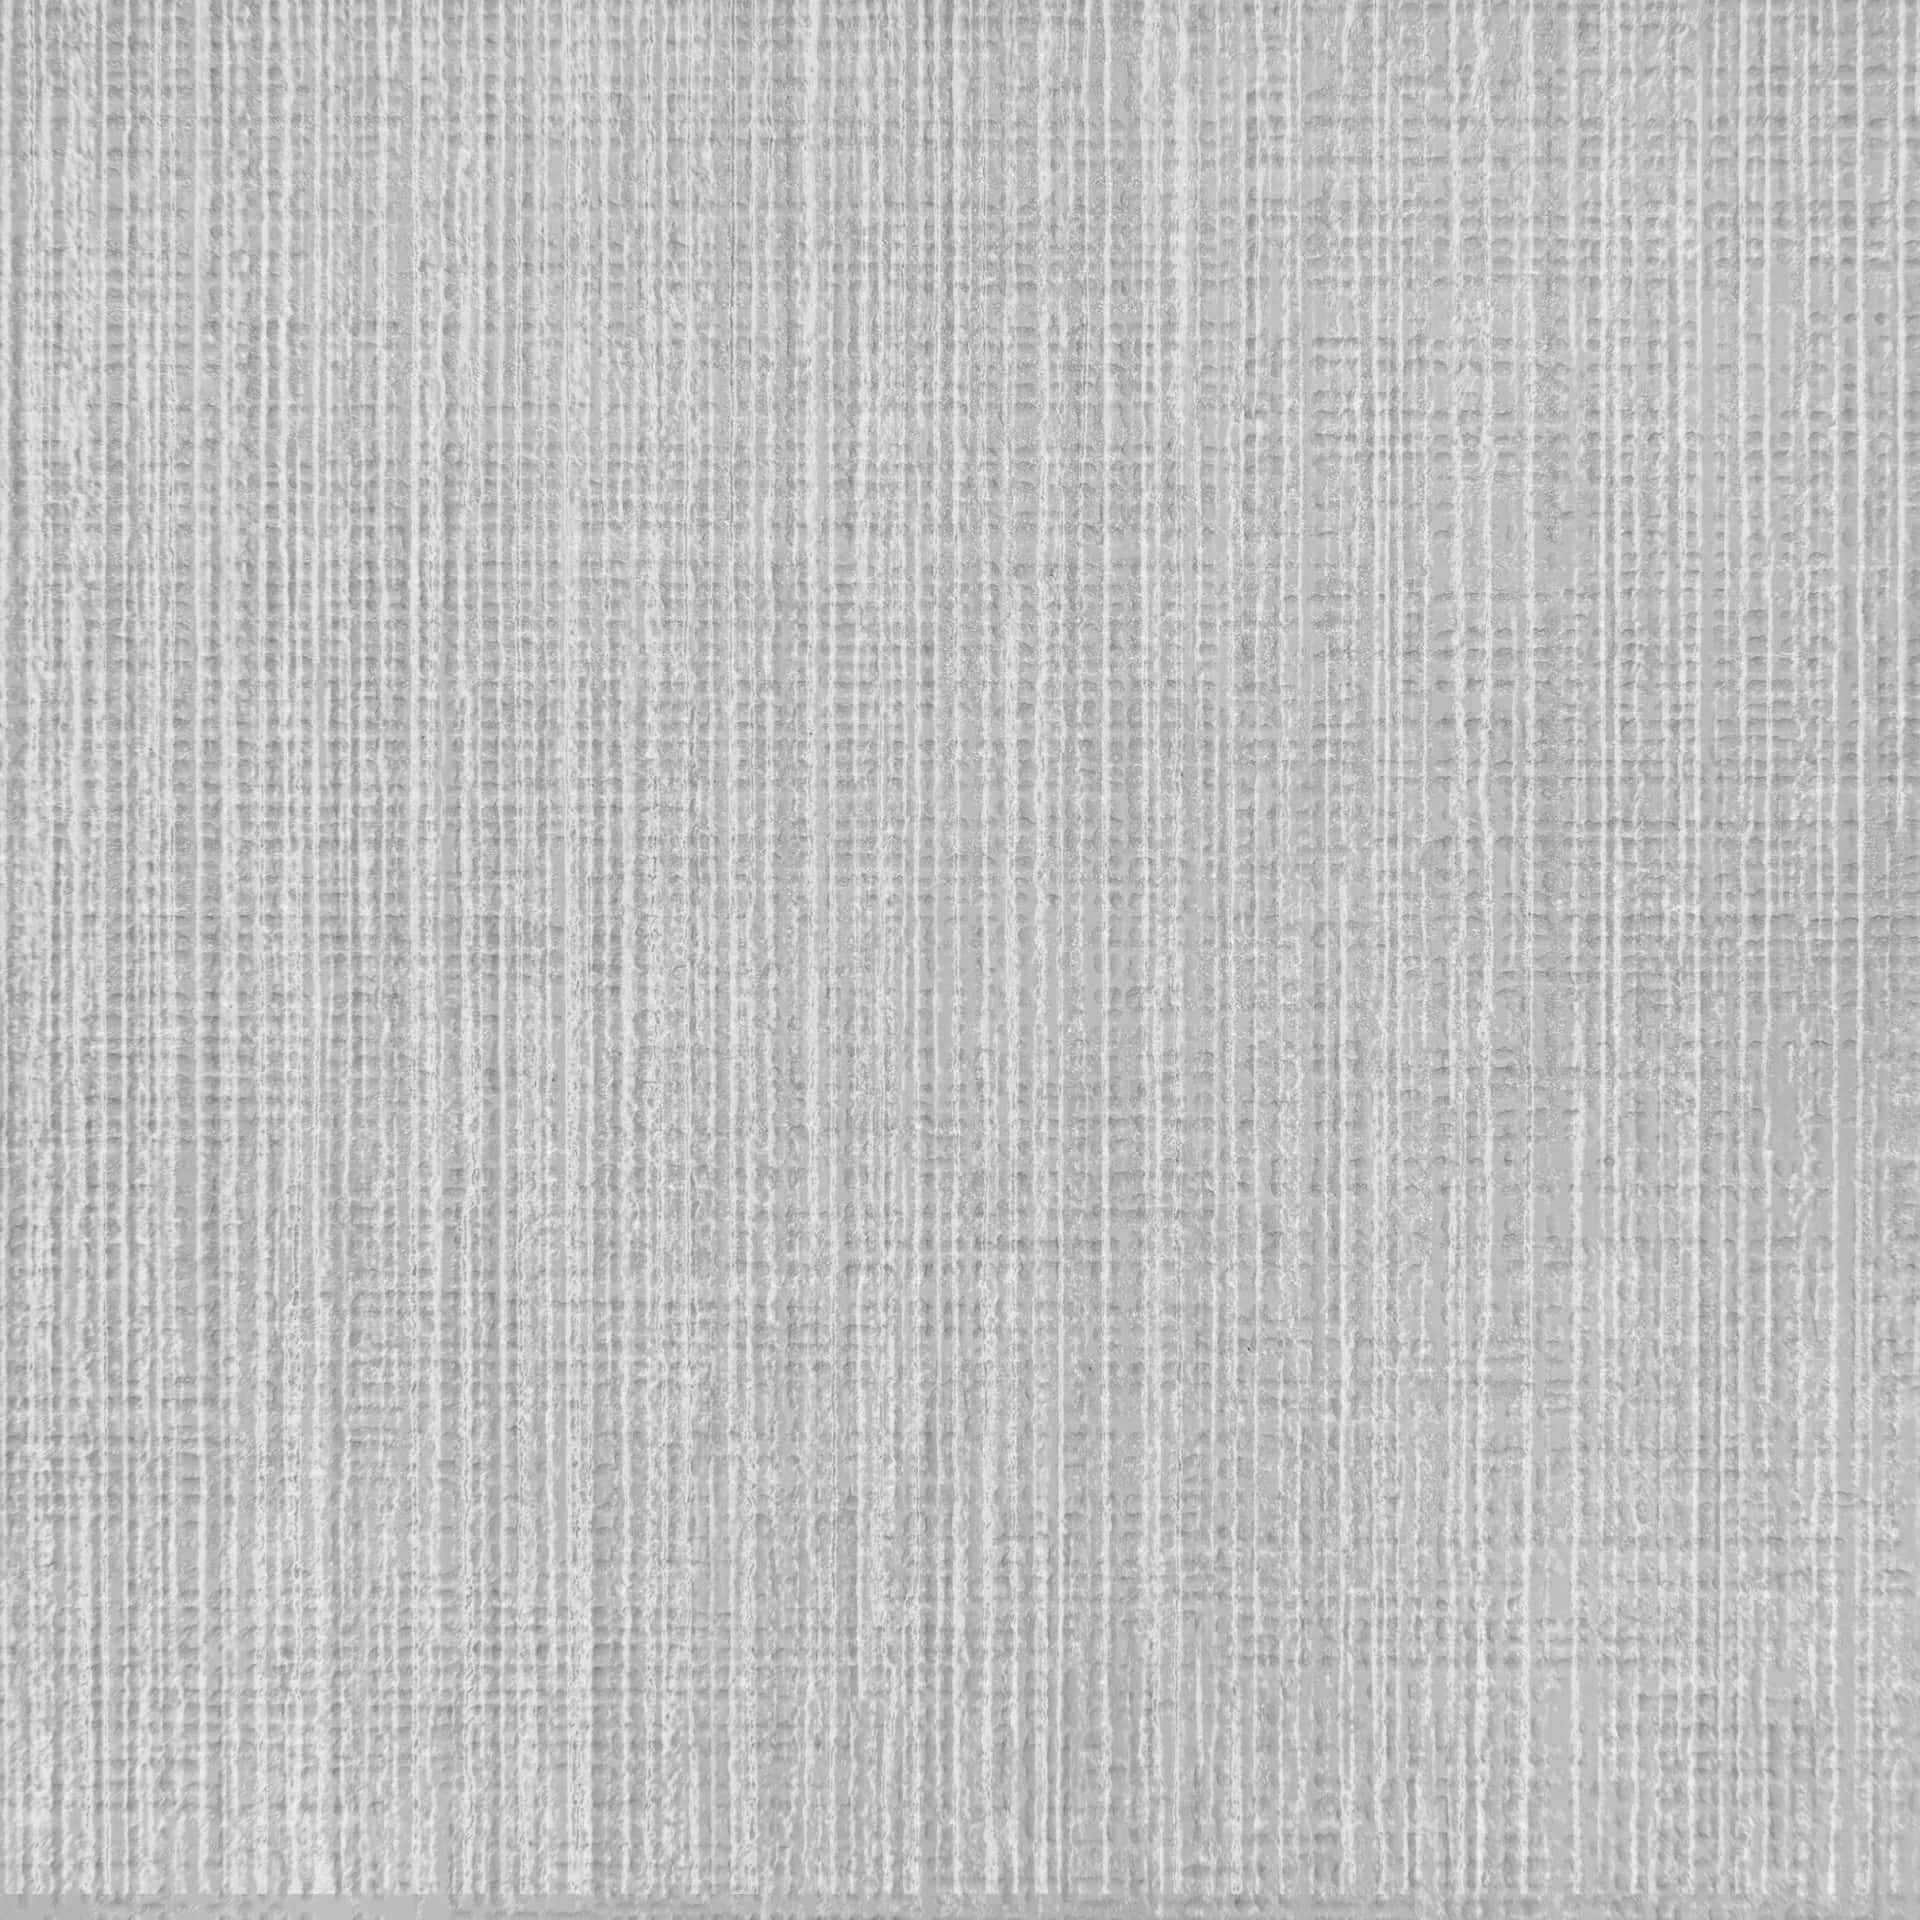 A Grey Woven Rug With A White Background